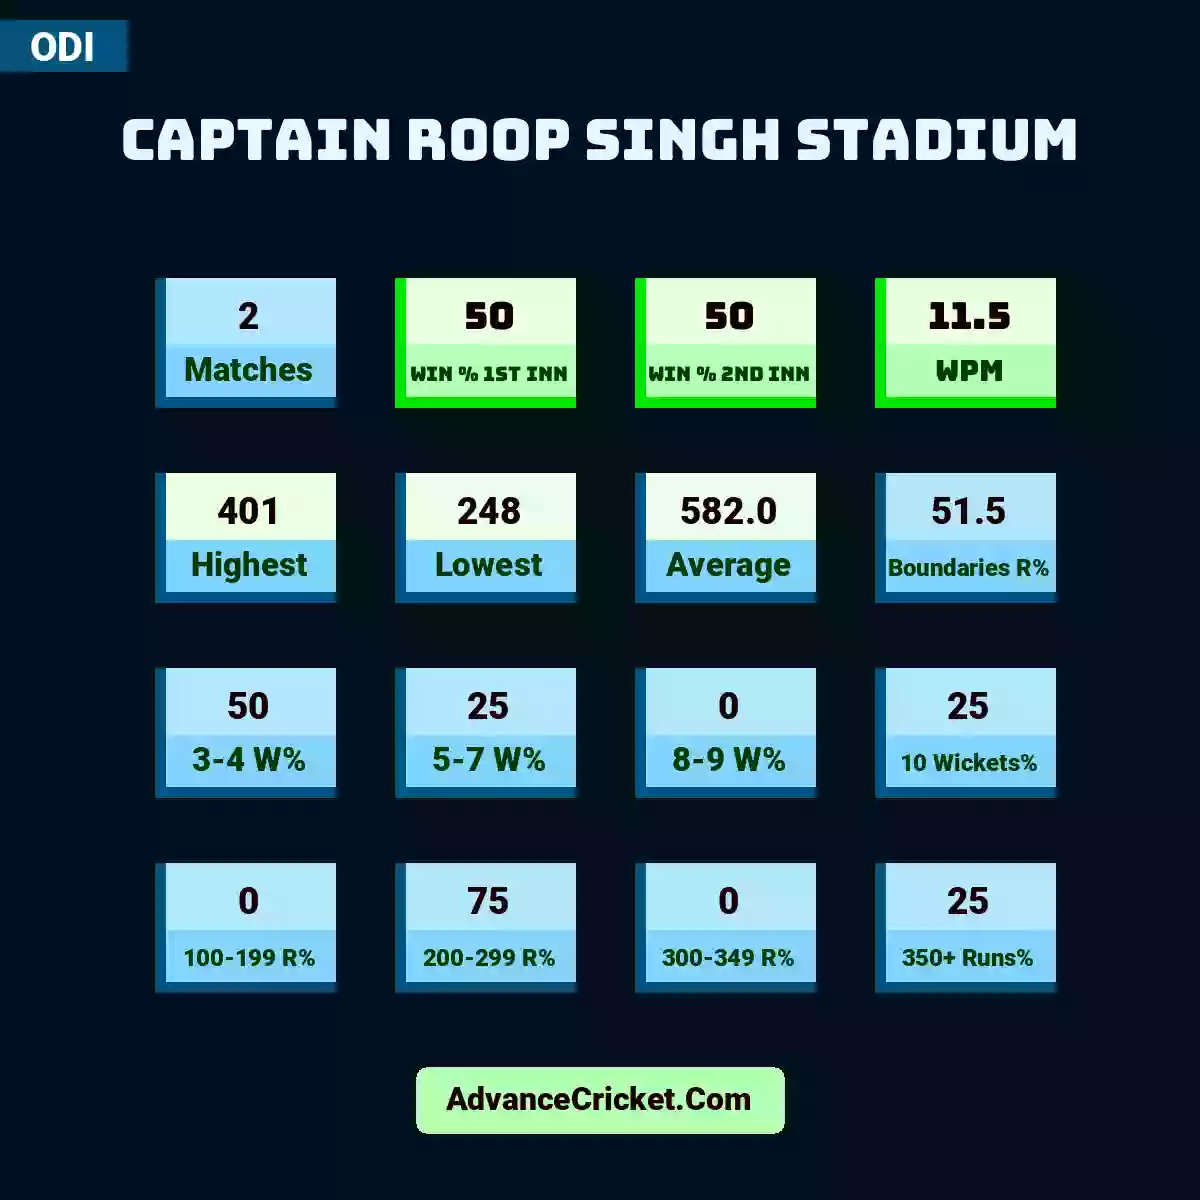 Image showing Captain Roop Singh Stadium with Matches: 2, Win % 1st Inn: 50, Win % 2nd Inn: 50, WPM: 11.5, Highest: 401, Lowest: 248, Average: 582.0, Boundaries R%: 51.5, 3-4 W%: 50, 5-7 W%: 25, 8-9 W%: 0, 10 Wickets%: 25, 100-199 R%: 0, 200-299 R%: 75, 300-349 R%: 0, 350+ Runs%: 25.